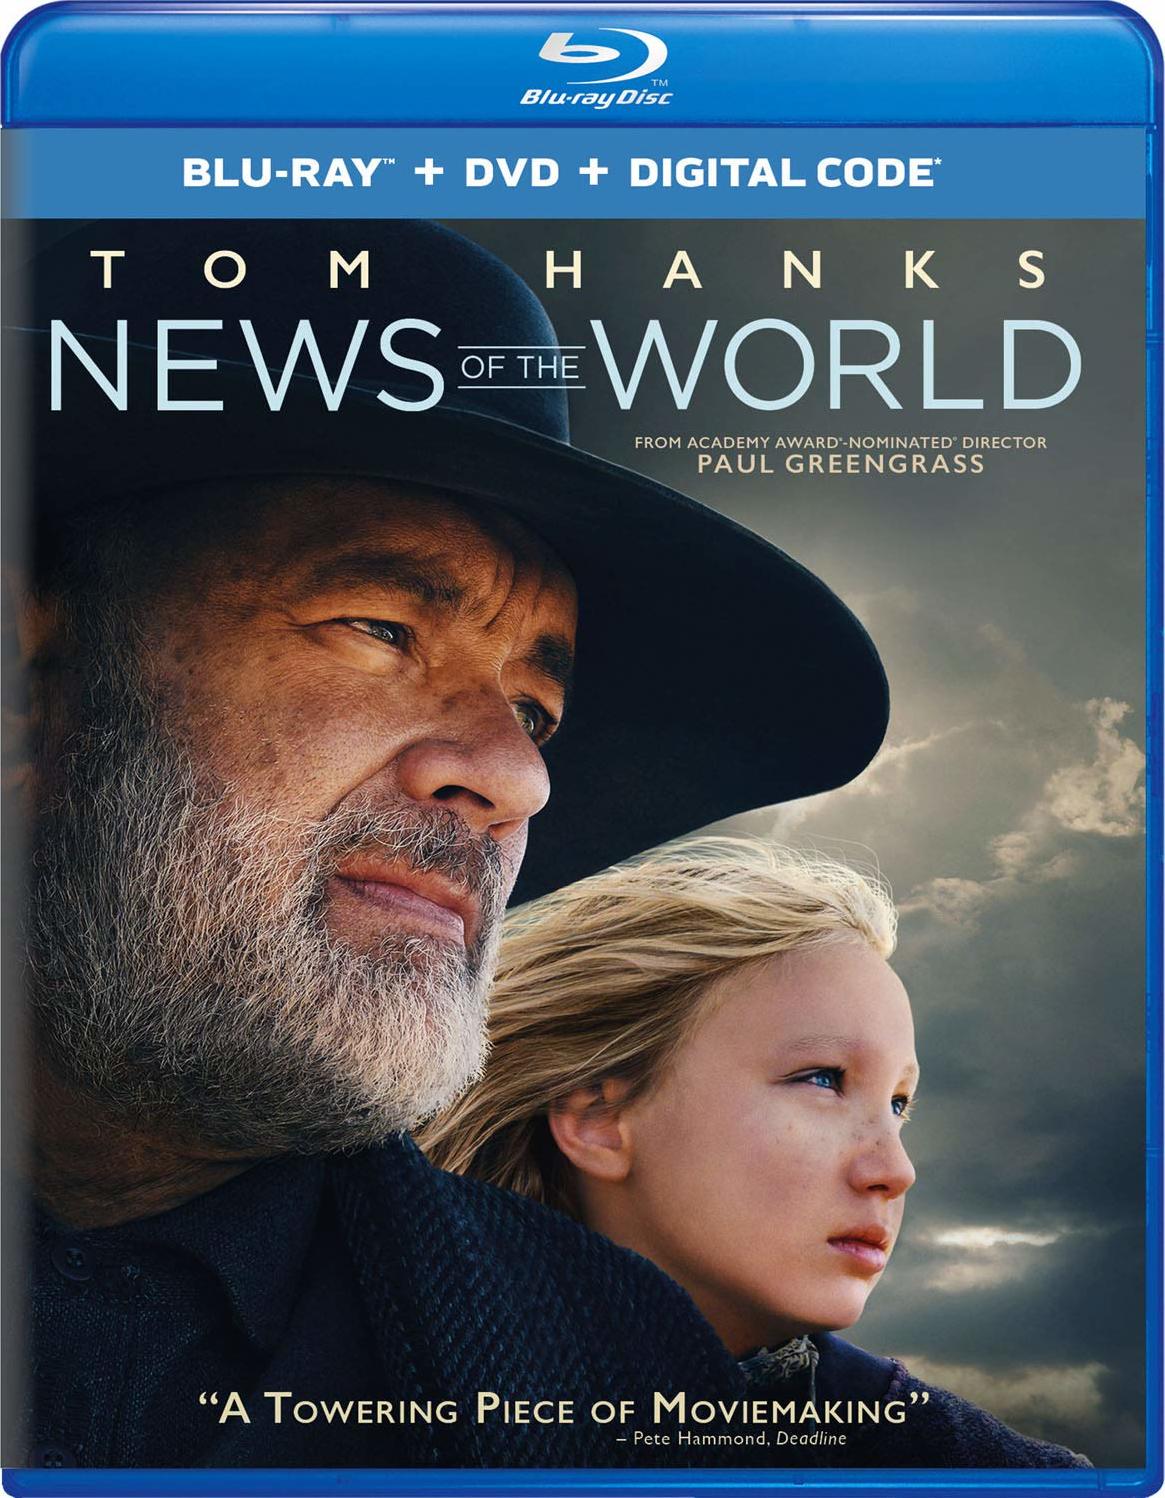 News of the World (2020) Noticias del Mundo (2020) [AC3 5.1 + SUP] [Blu Ray]  283526_front